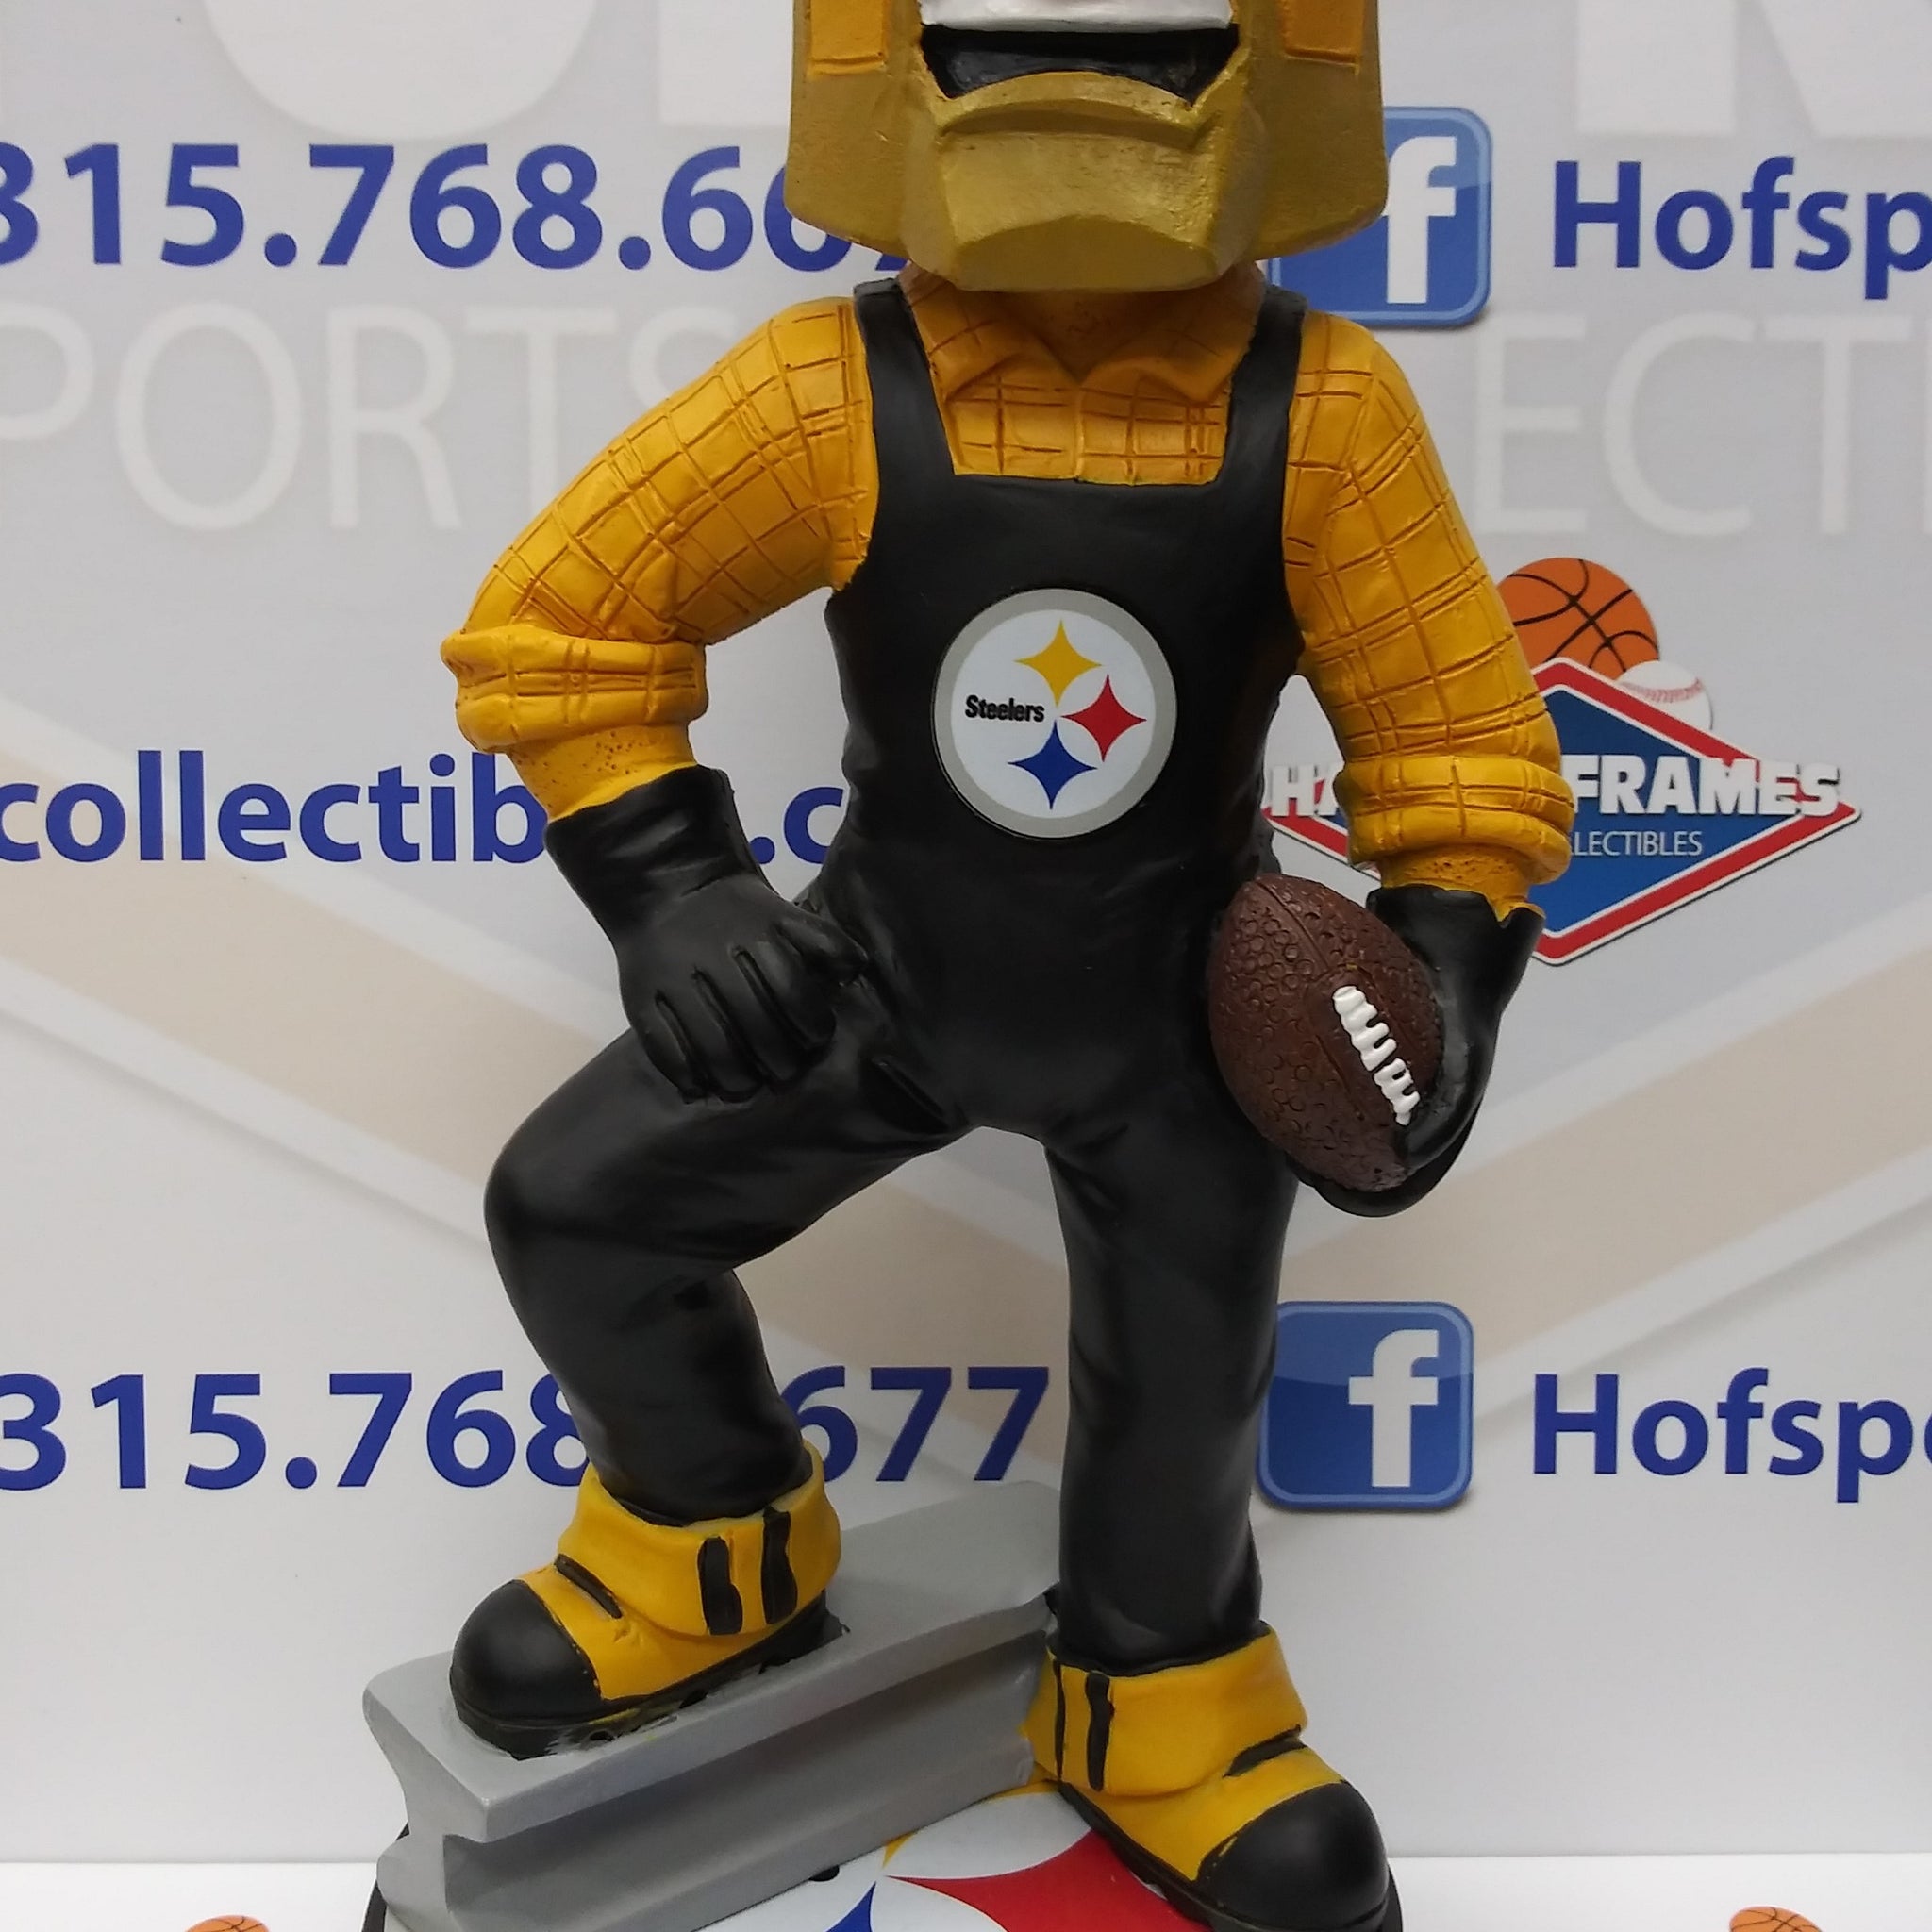 FOCO LIMITED EDITION HANDCRAFTED PITTSBURGH STEELERS "STEELY McBEAM" MASCOT STATUE!